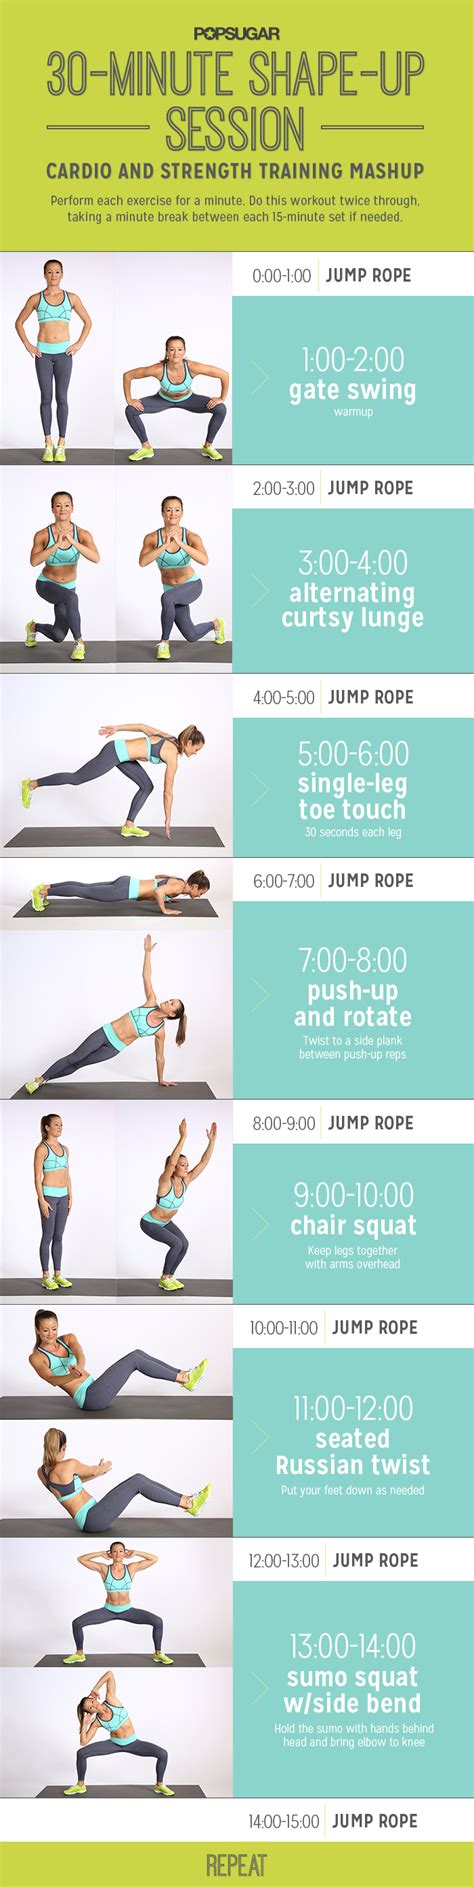 printable workout 30 minutes cardio and strength training